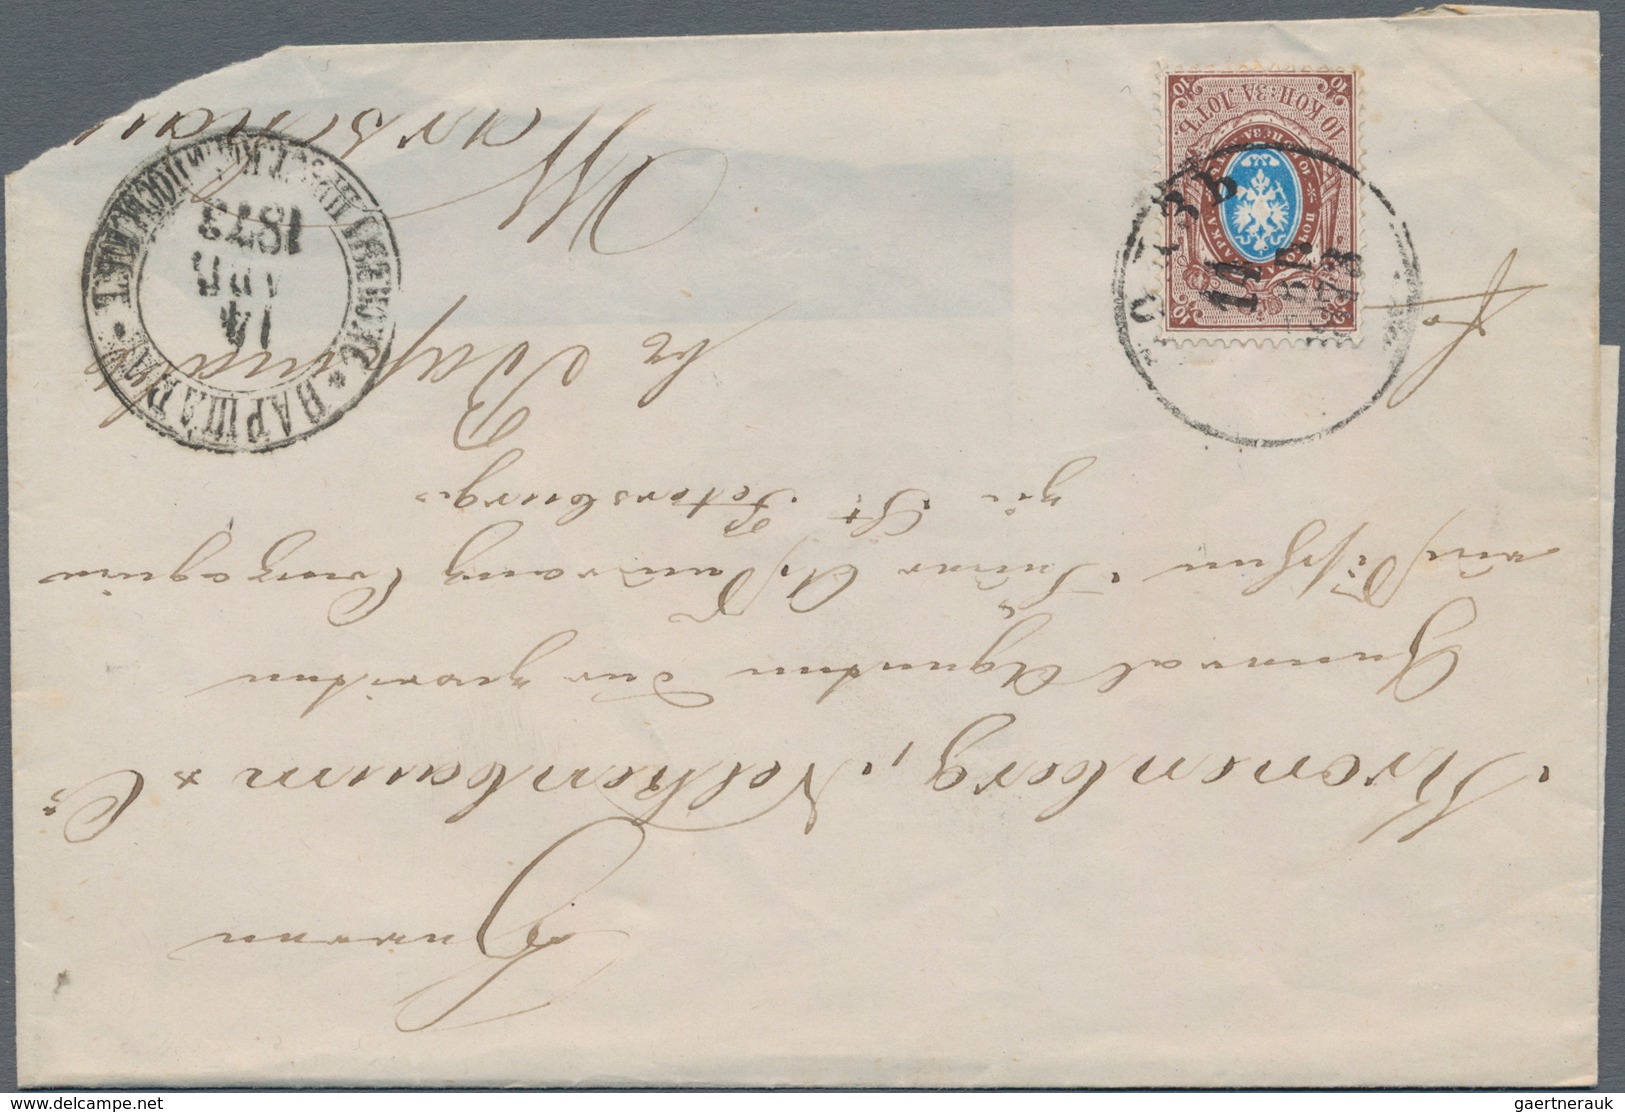 Polen - Russische Periode: 1871/74 five letters all with single franking 10 Kop. brown coat of arms